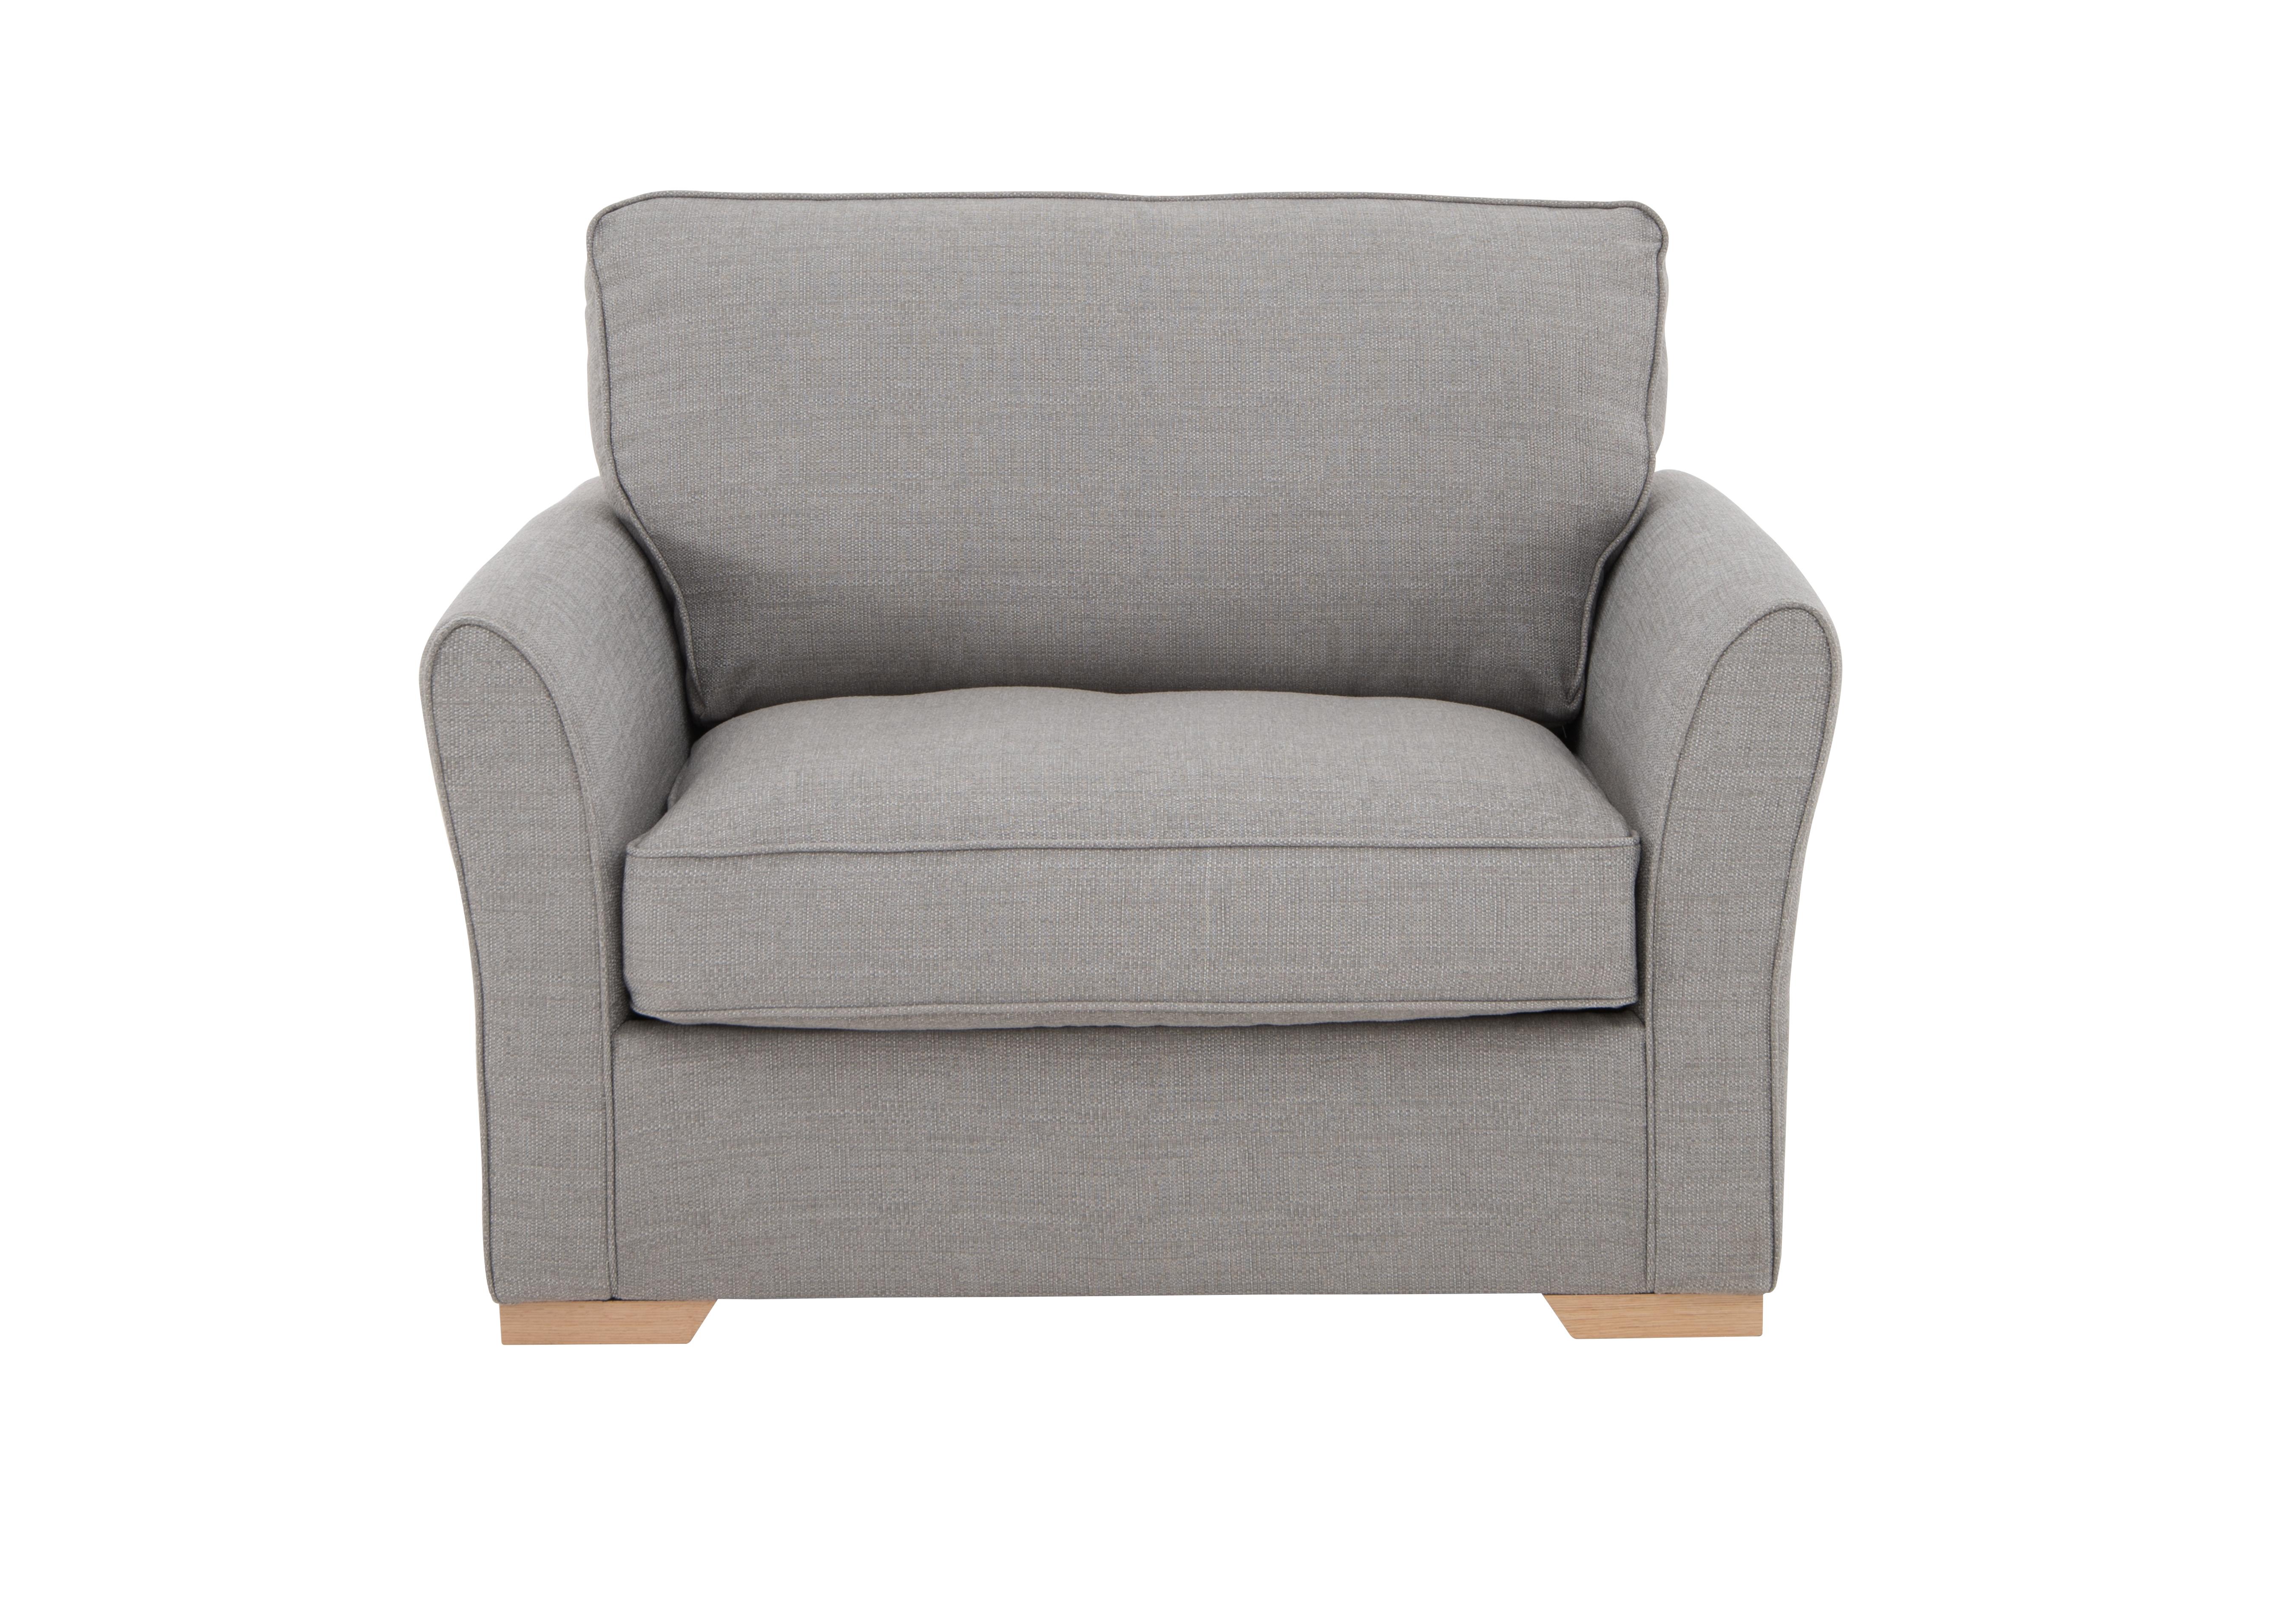 The Weekender Collection Breeze Fabric Deluxe Armchair Sofa Bed